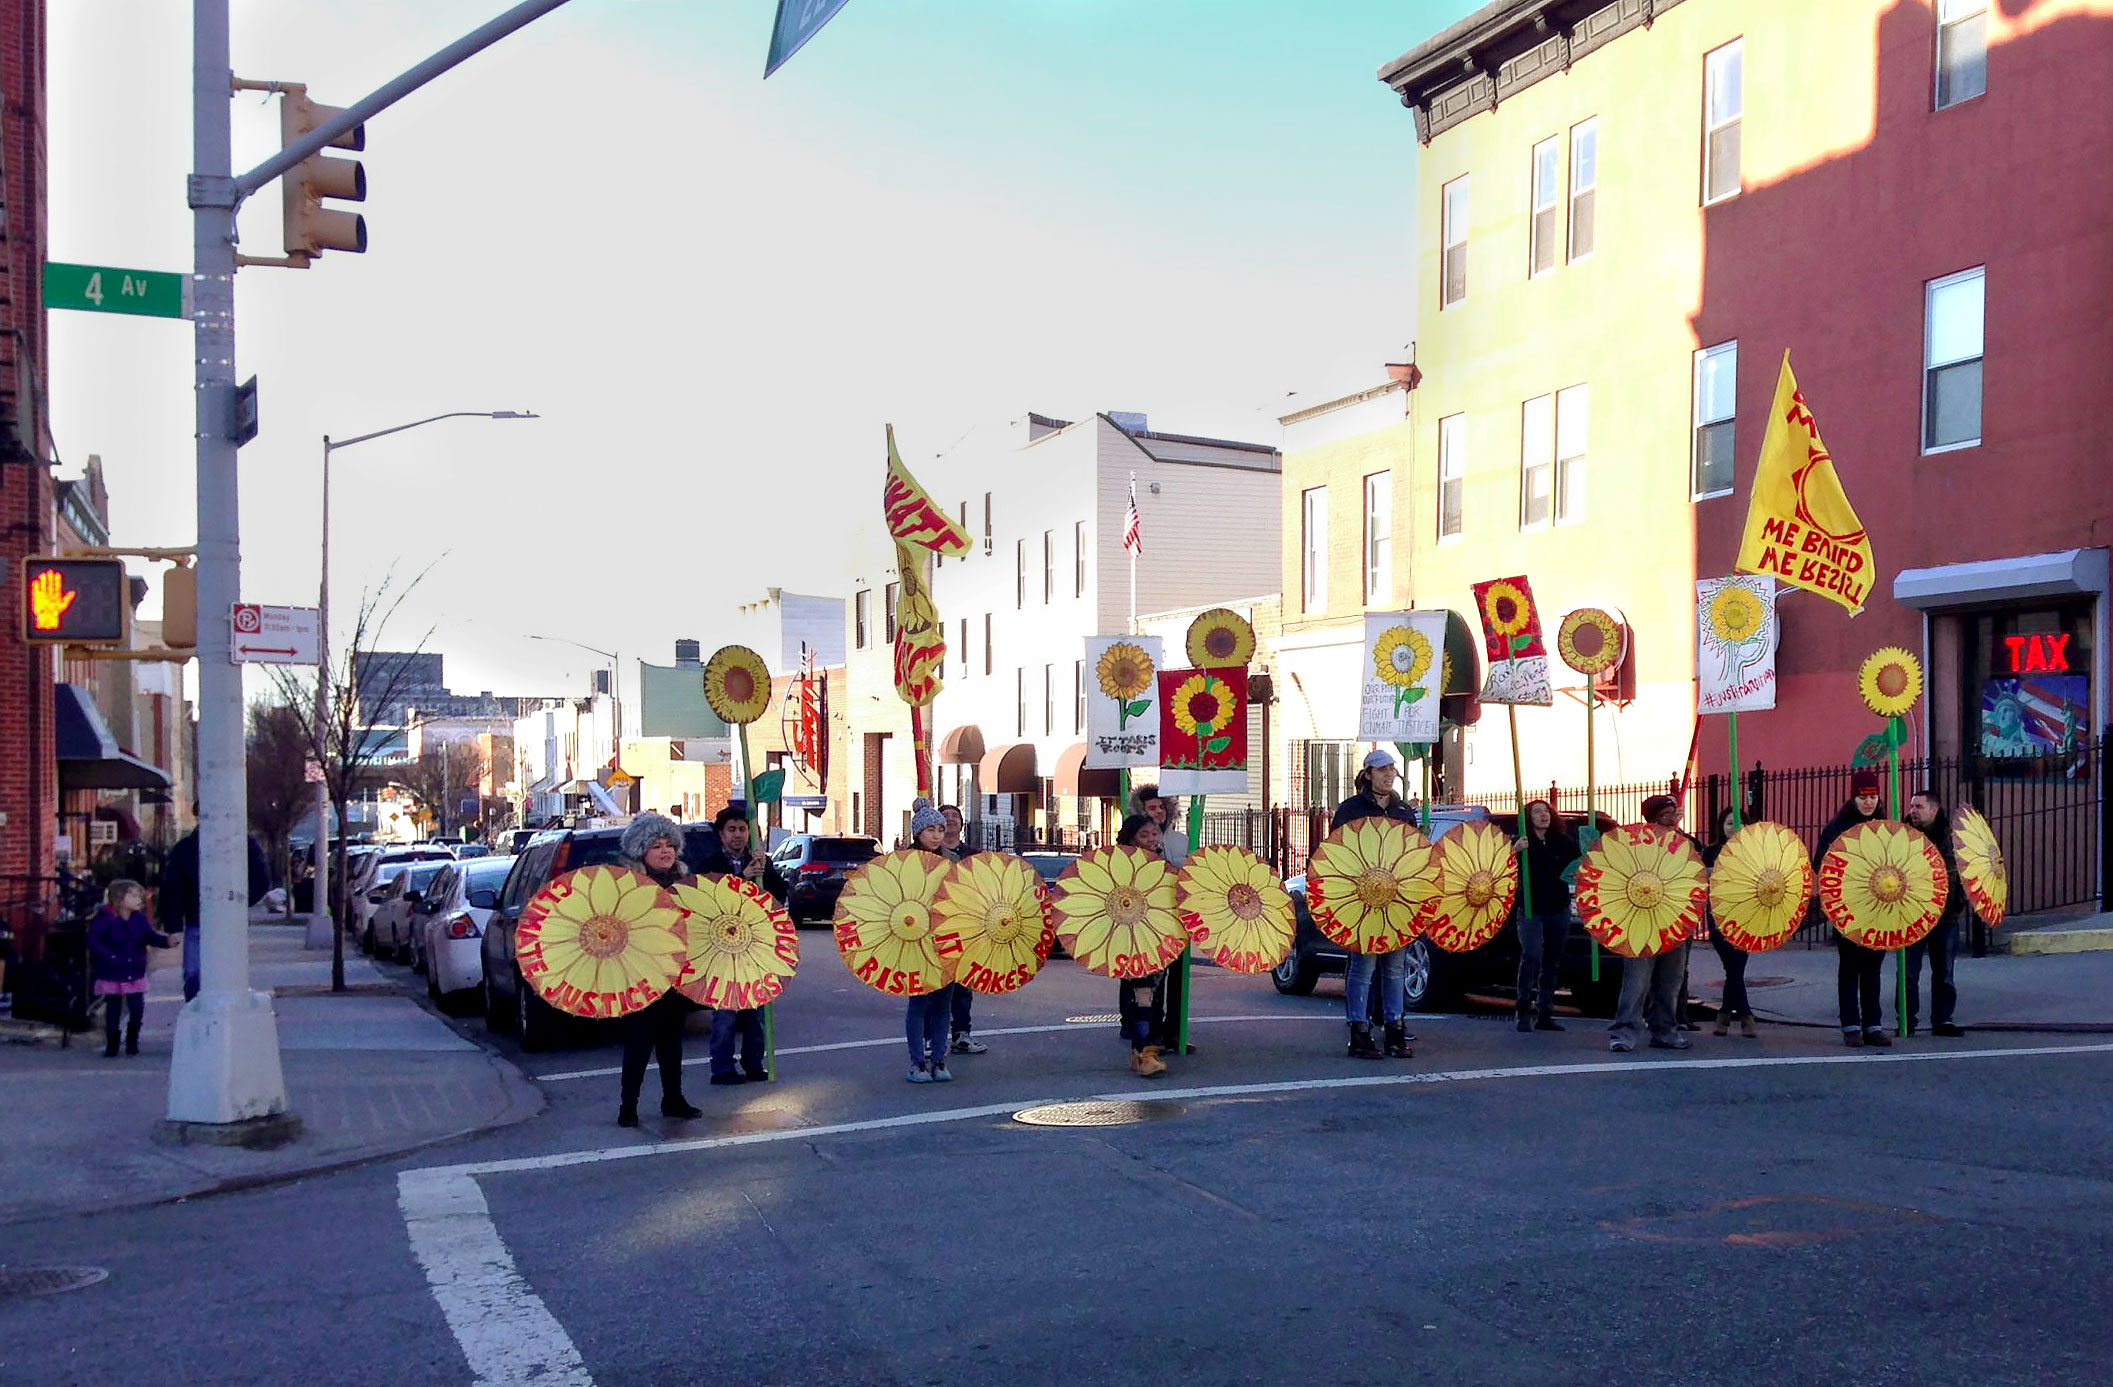 Members of UPROSE on the streets of Sunset Park brandishing "Climate Justice" and "Solar" signs in preparation for the People's Climate March in Washington DC in 2017. Photo by Amy Howden-Chapman